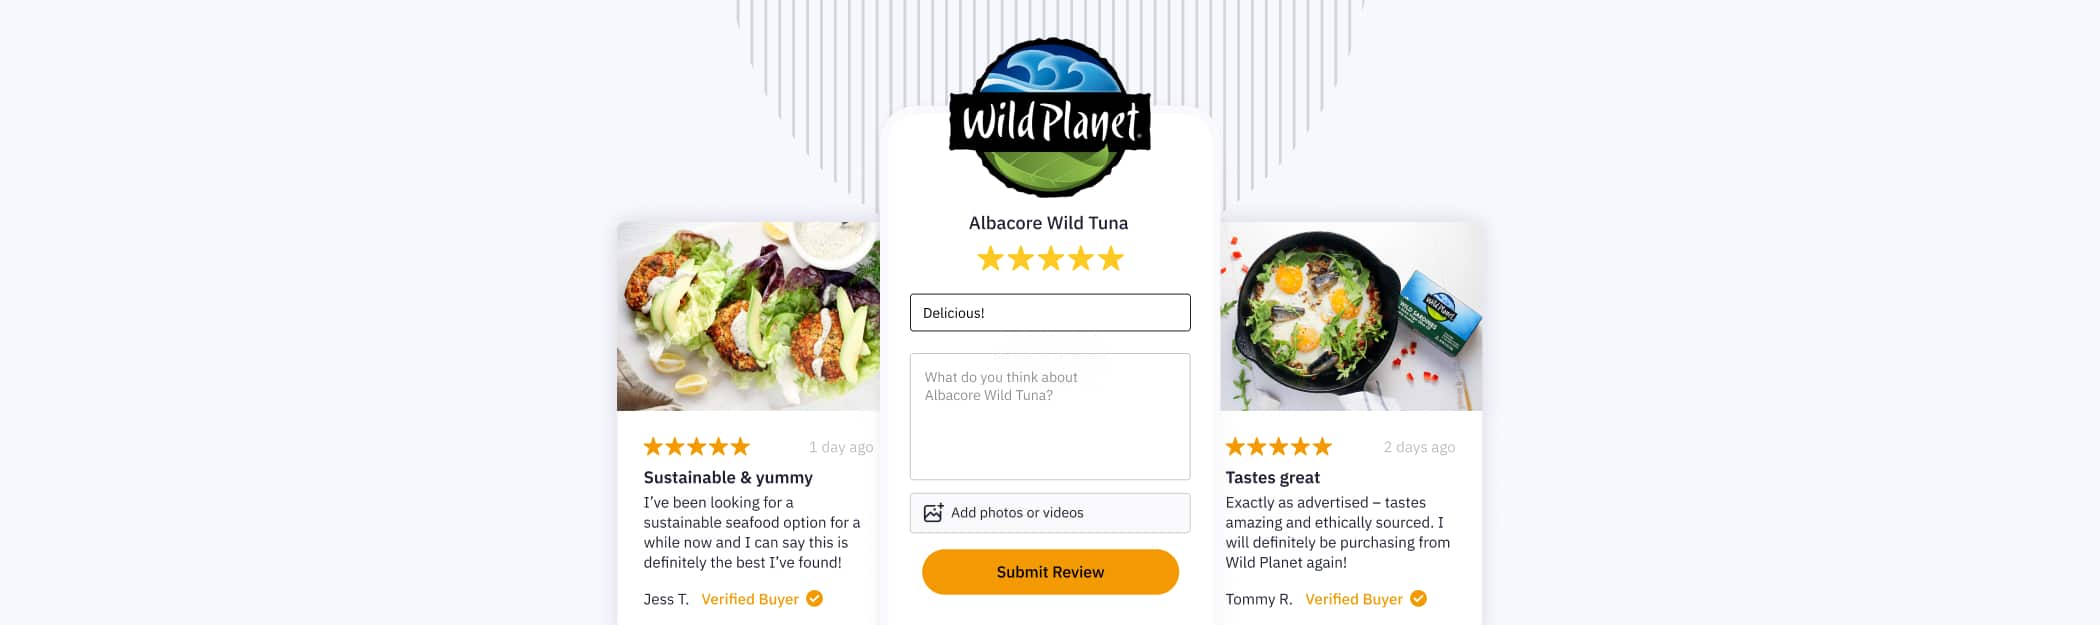 How Wild Planet Doubled its Conversion Rate with Okendo